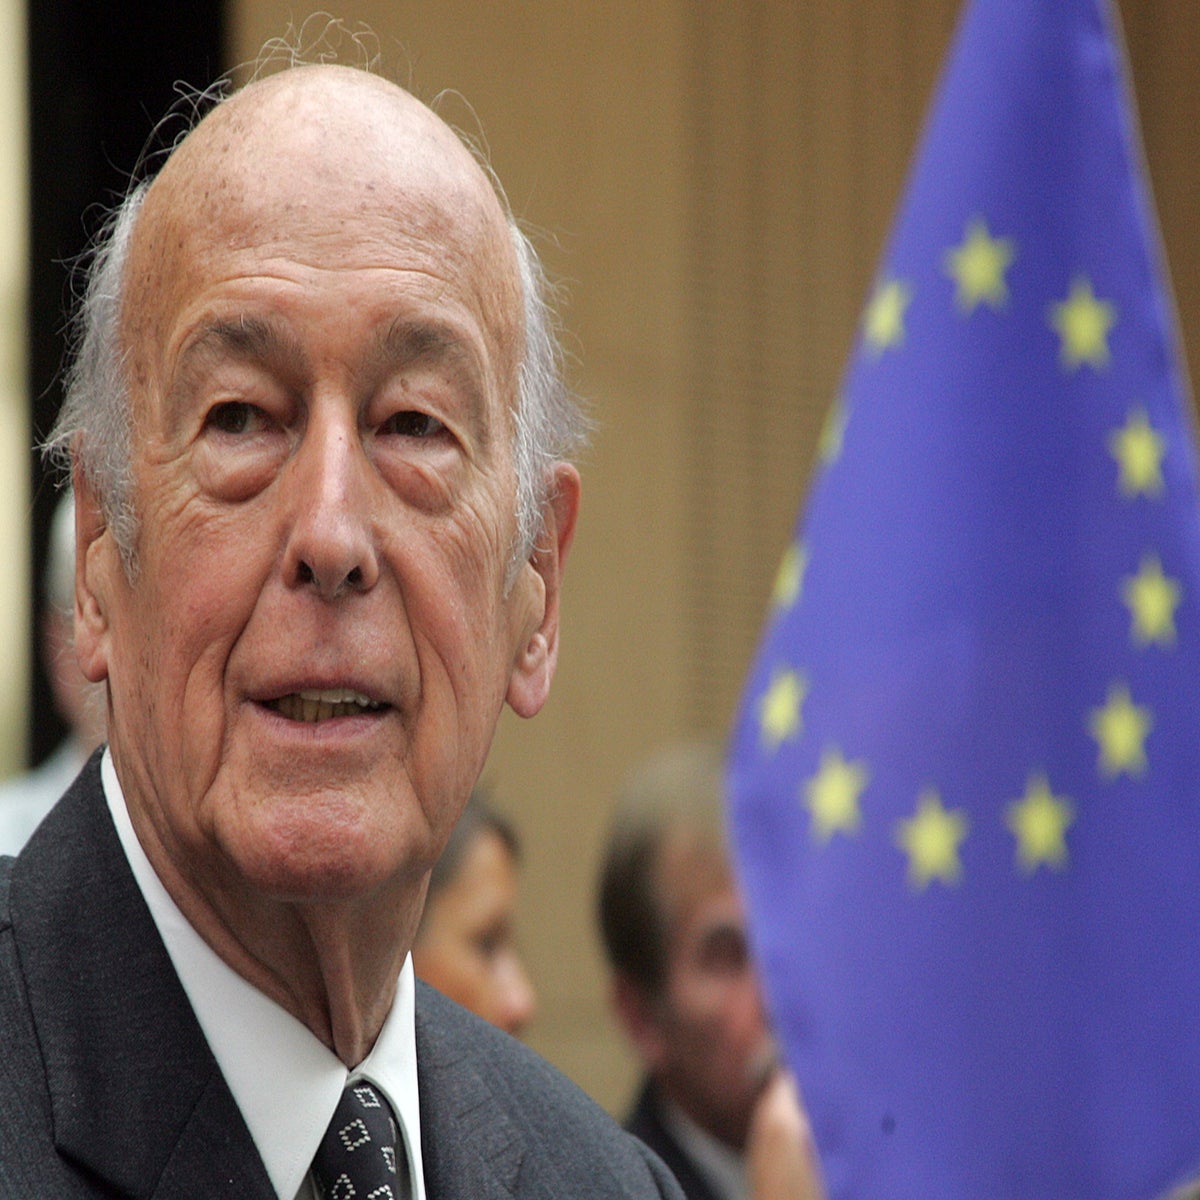 Musée d'Orsay in Paris renamed after late French president Valéry Giscard d 'Estaing